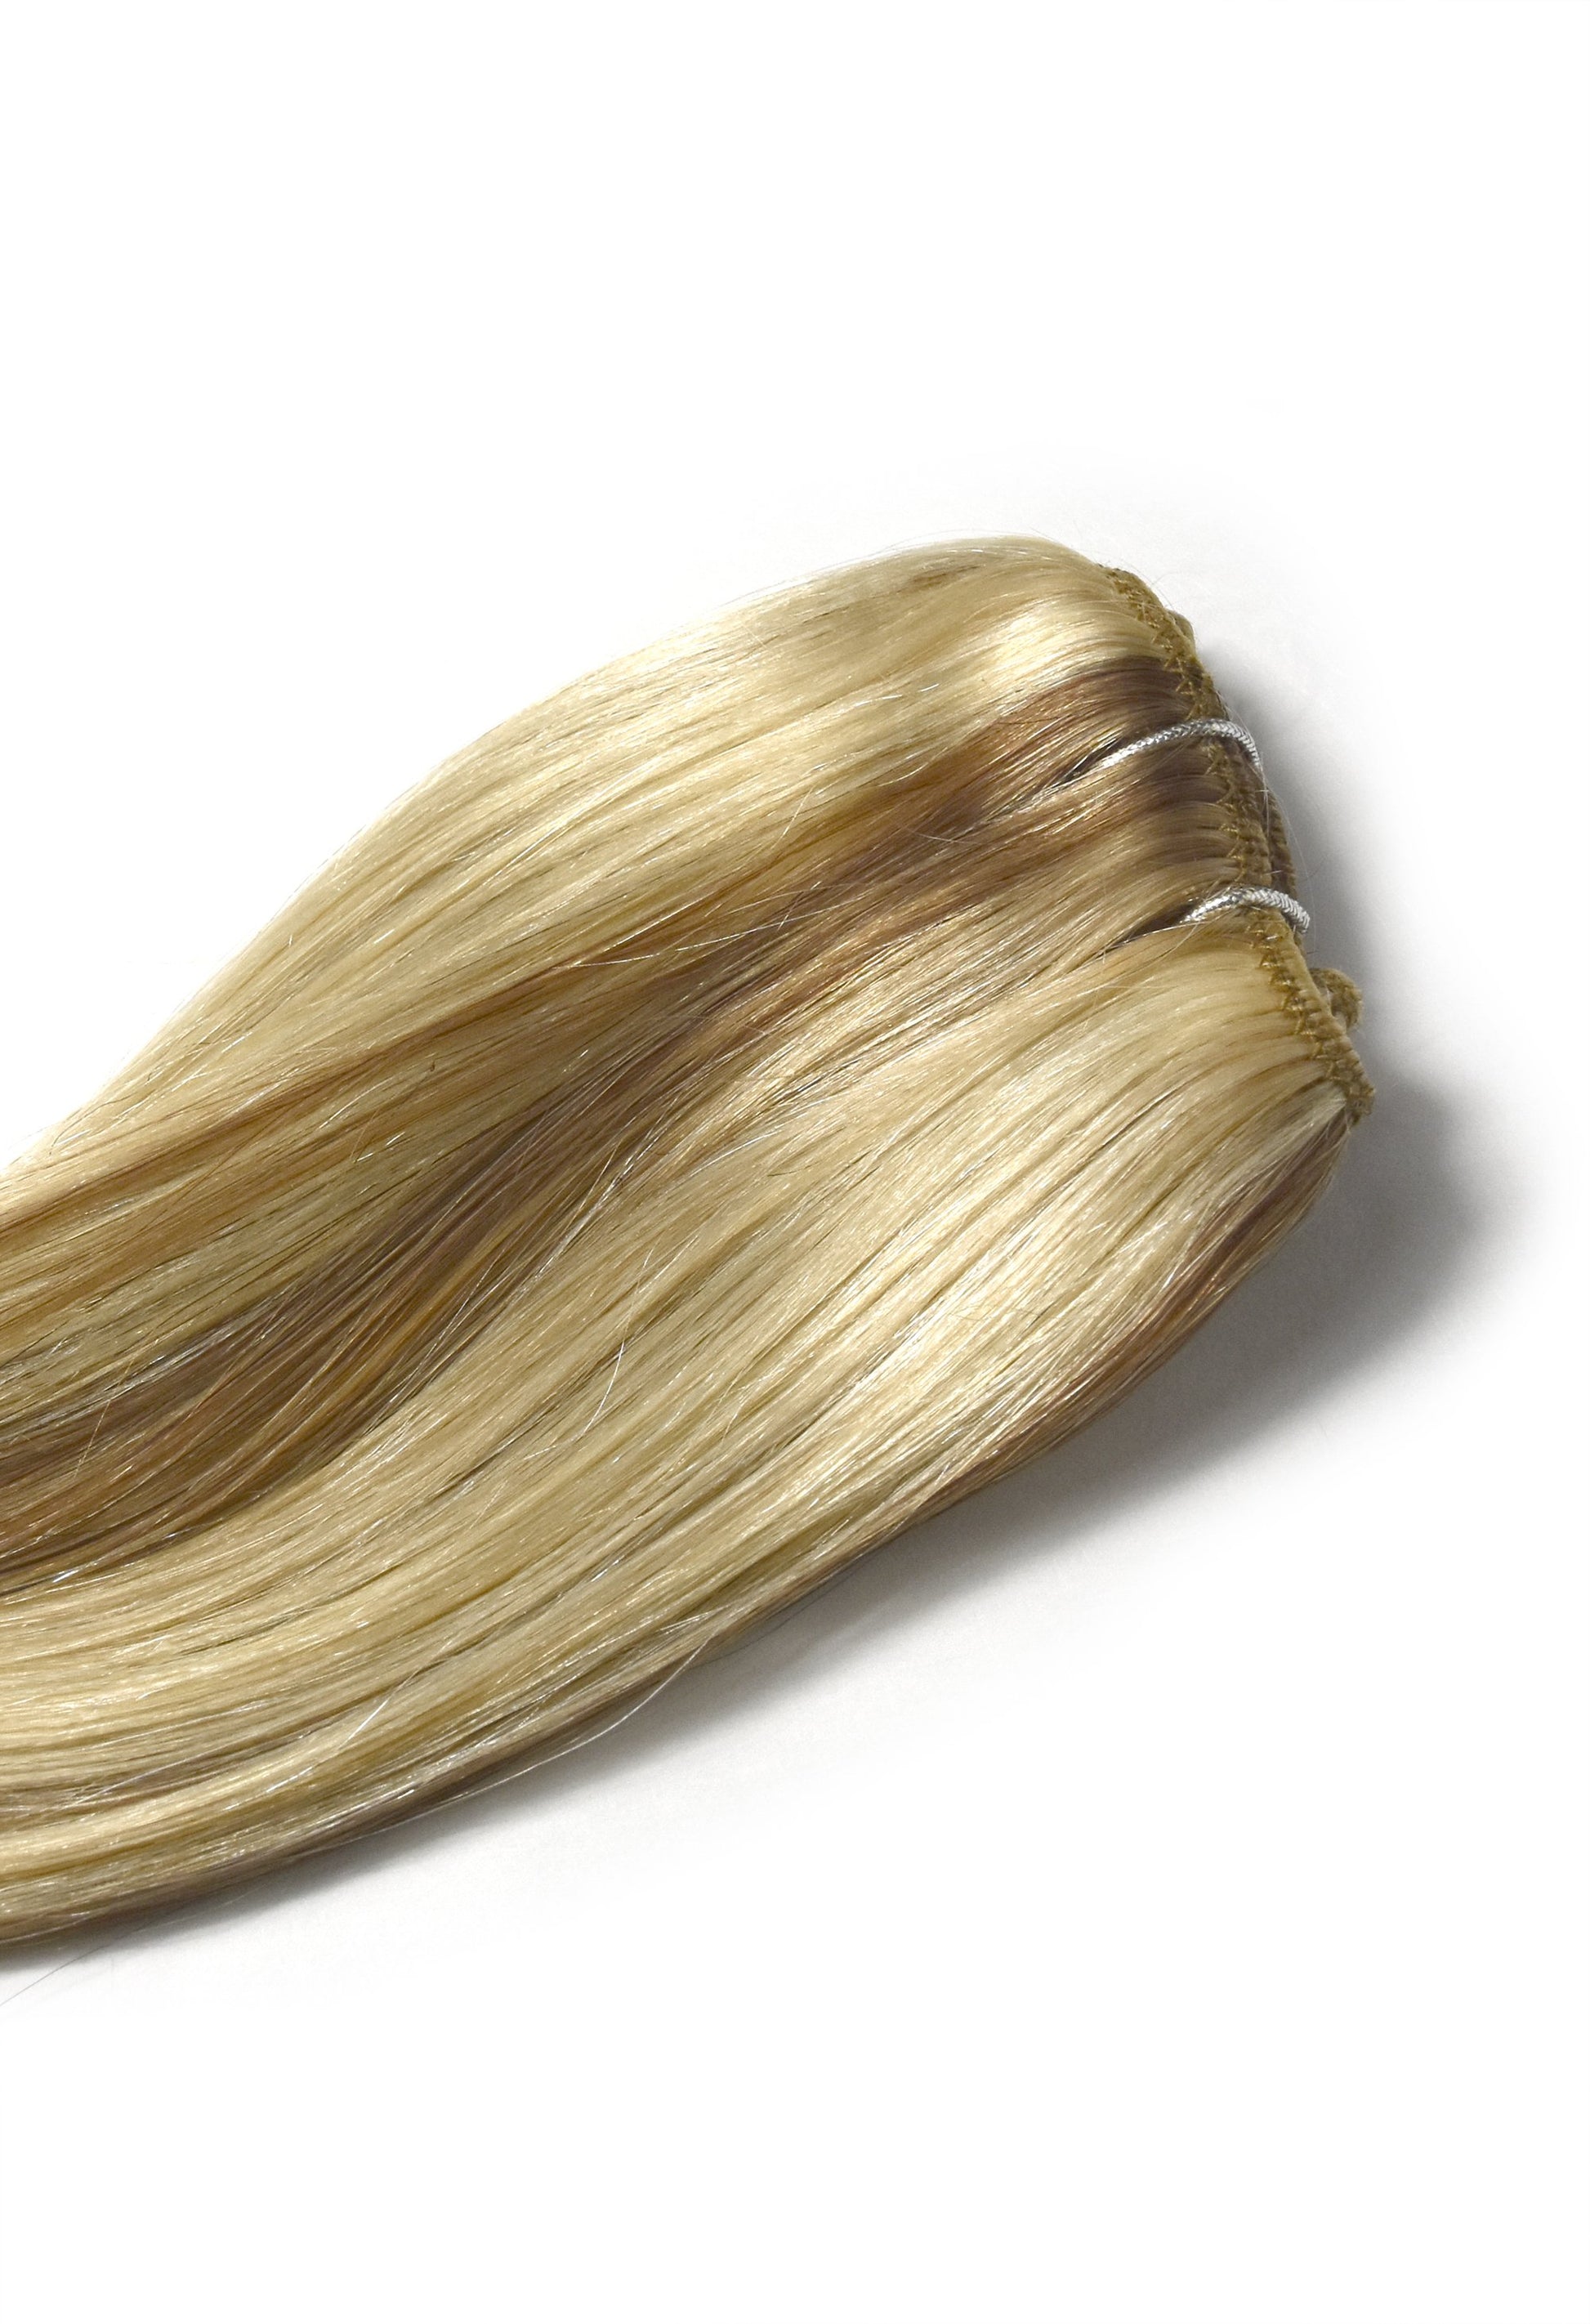 hair extensions uk - one piece clip in extensions shade 12-16-613